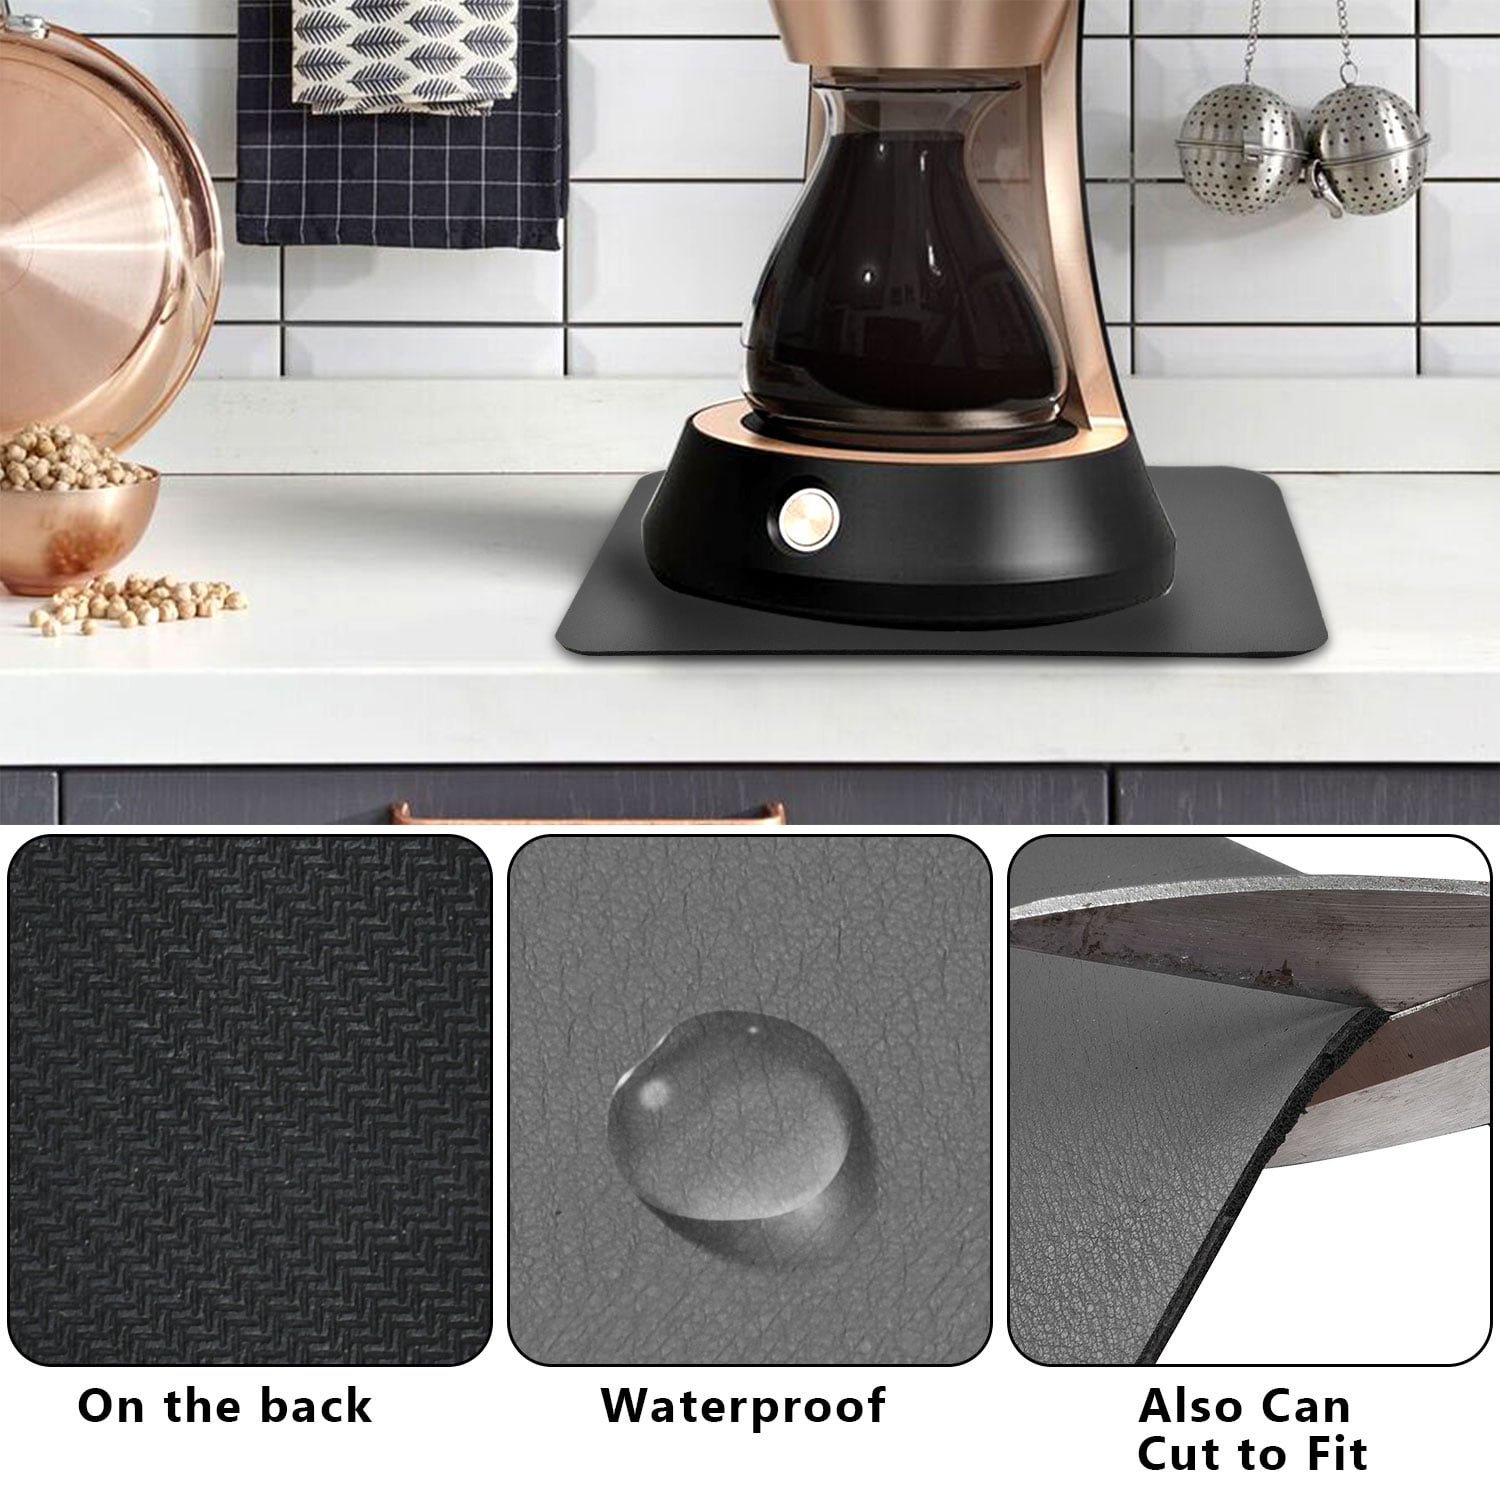 Color&Geometry Coffee Mat, Dish Drying Mats for Kitchen Counter